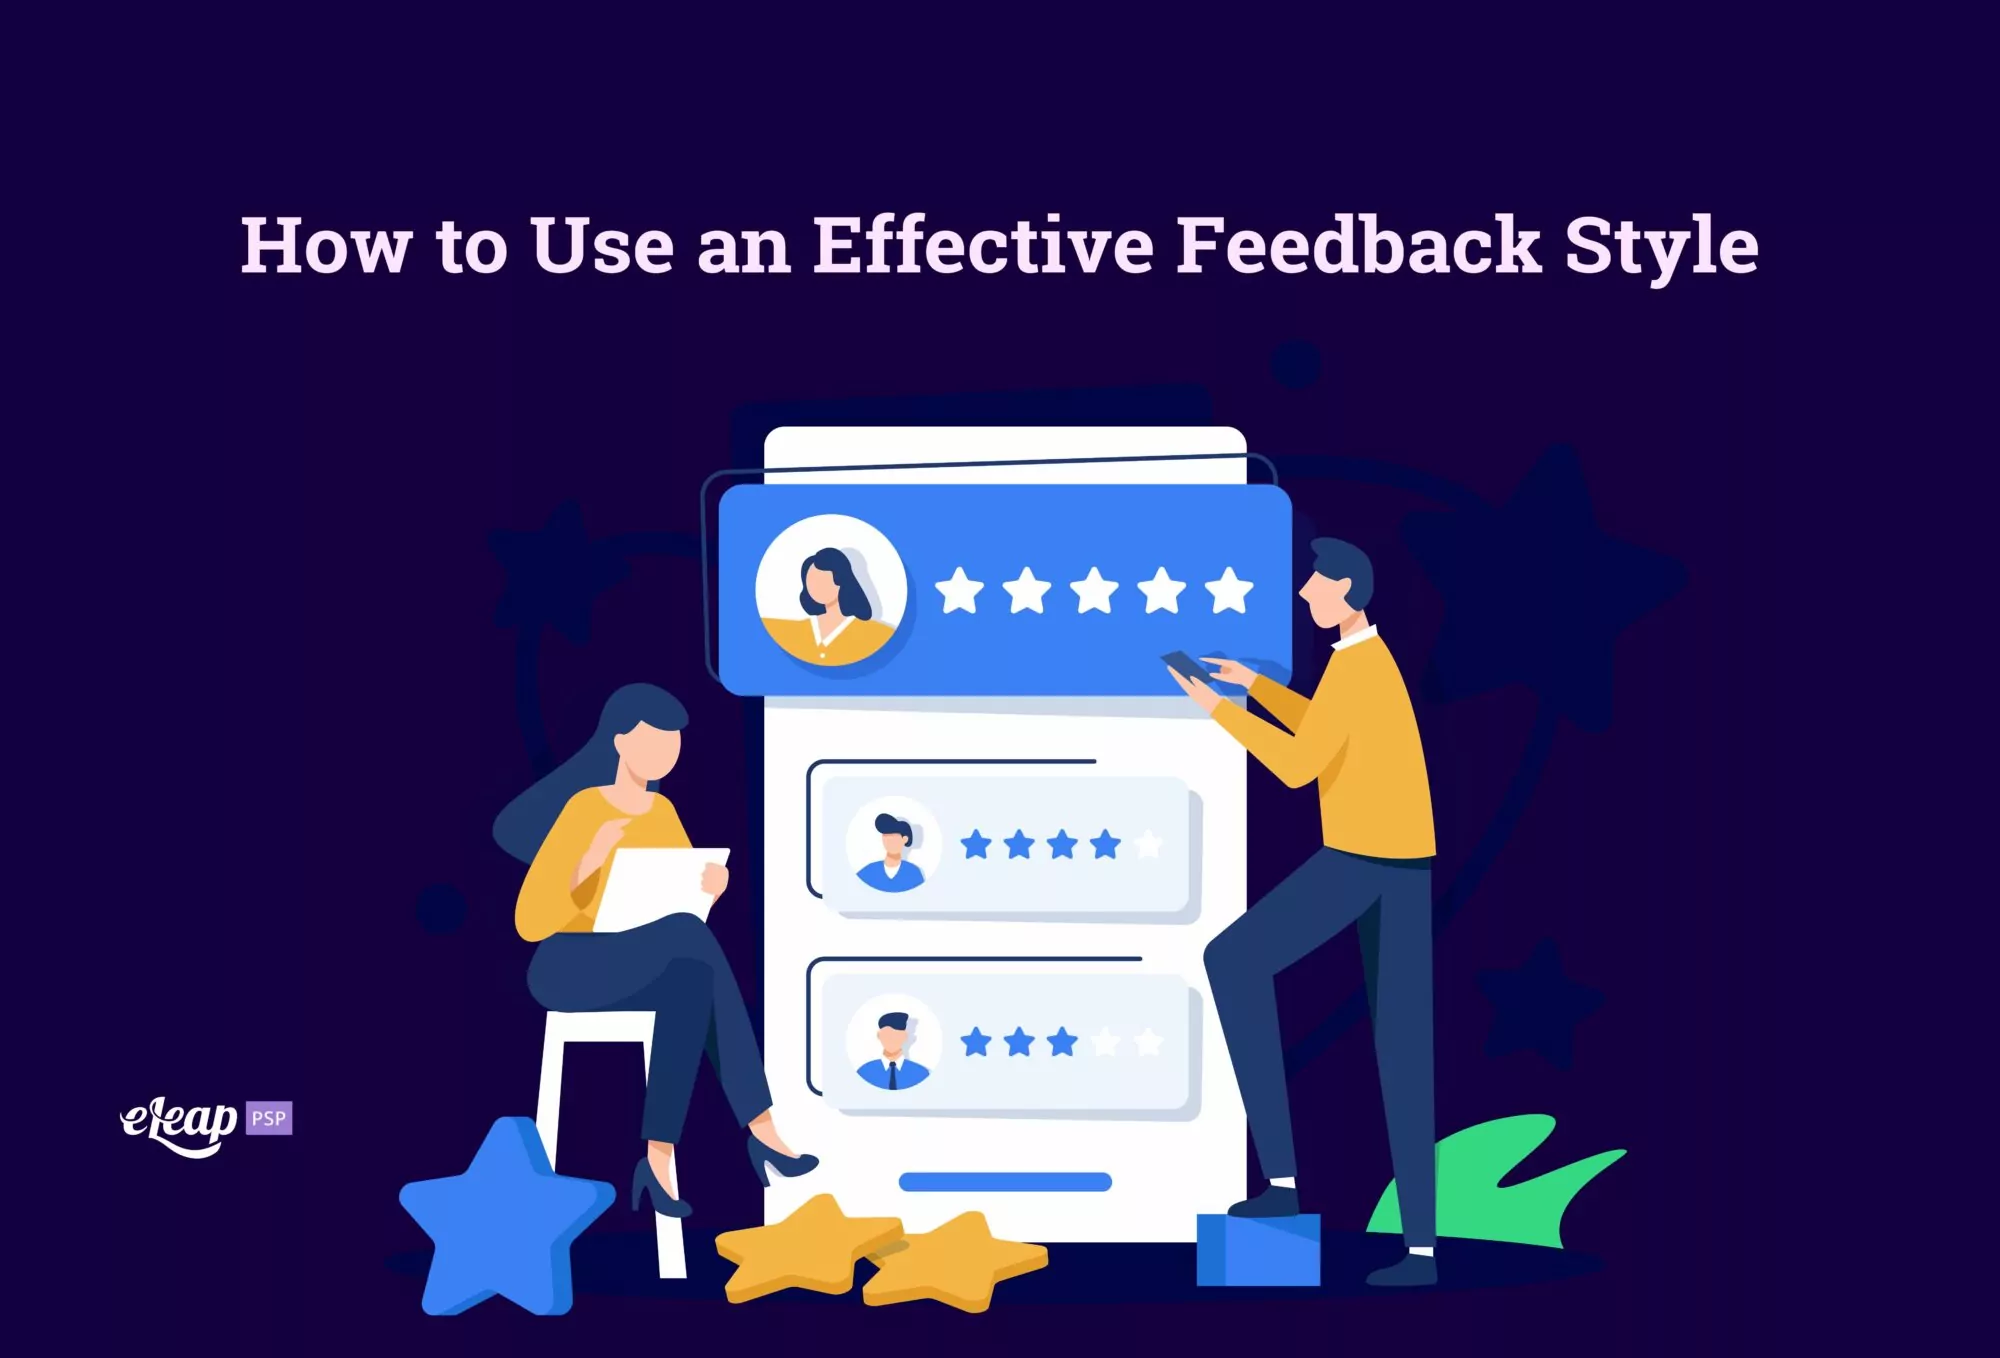 How to Use an Effective Feedback Style